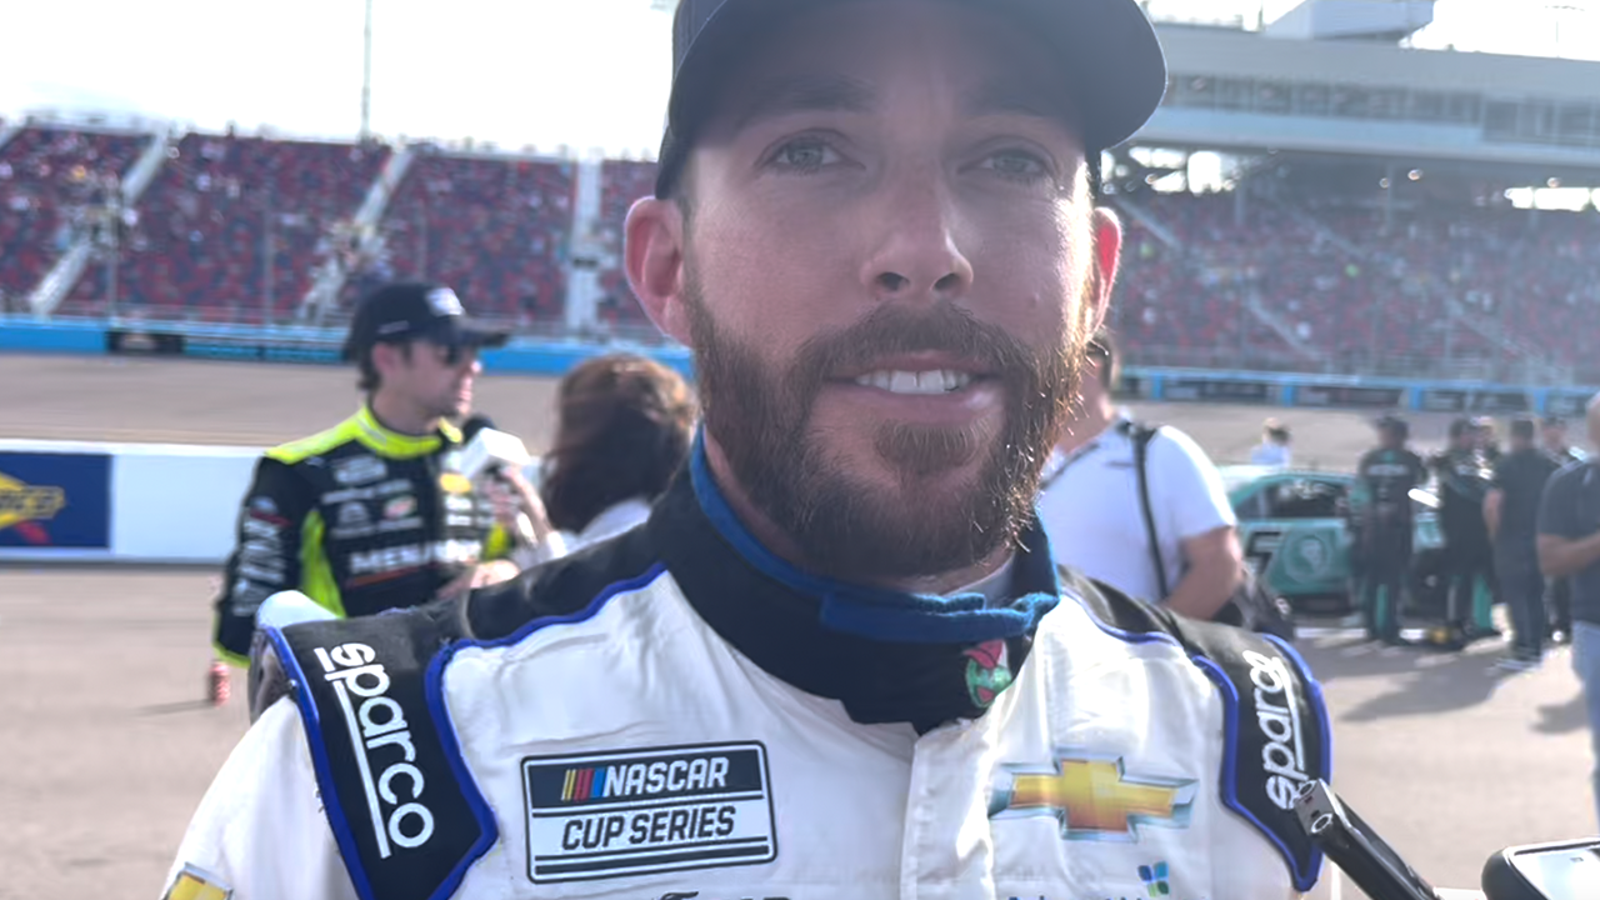 Ross Chastain shares his philosophy on final restarts at Phoenix